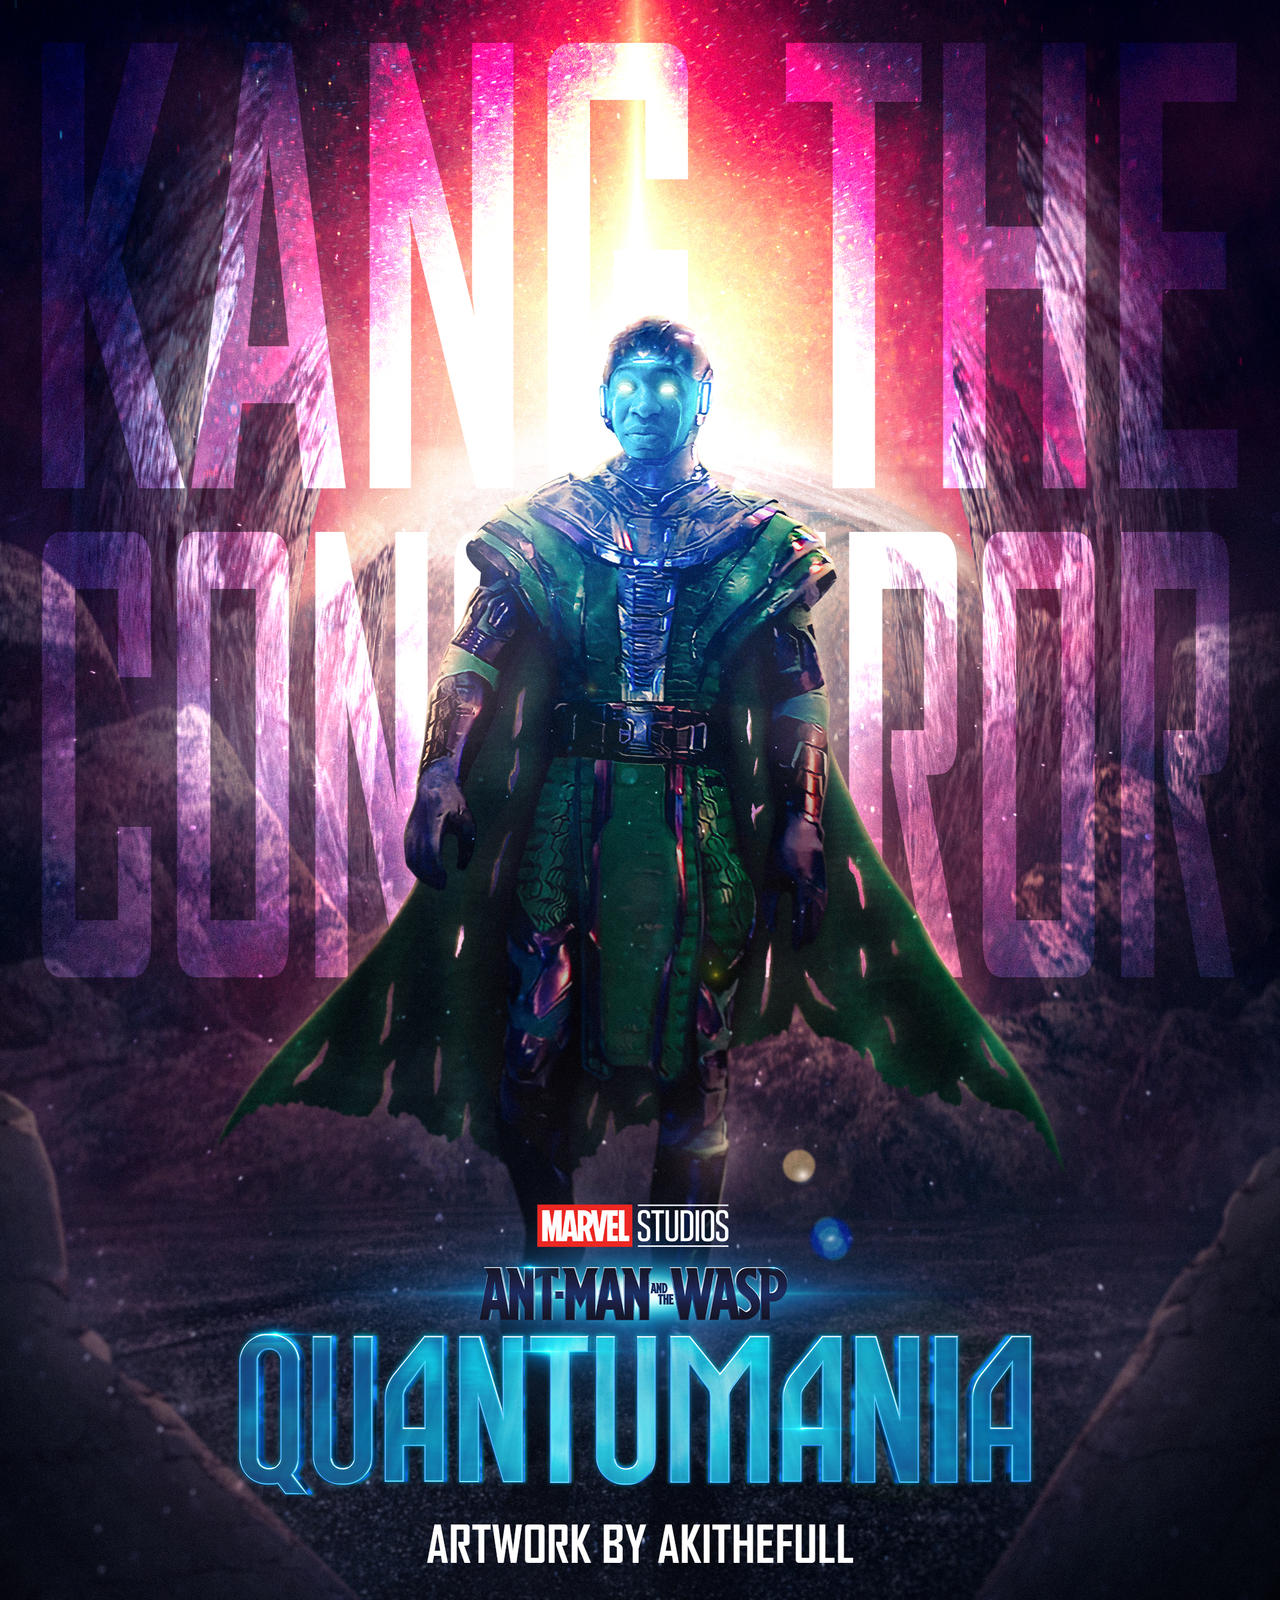 This is what I think Avengers: The Kang Dynasty might look like after  Quantumania : r/marvelstudios